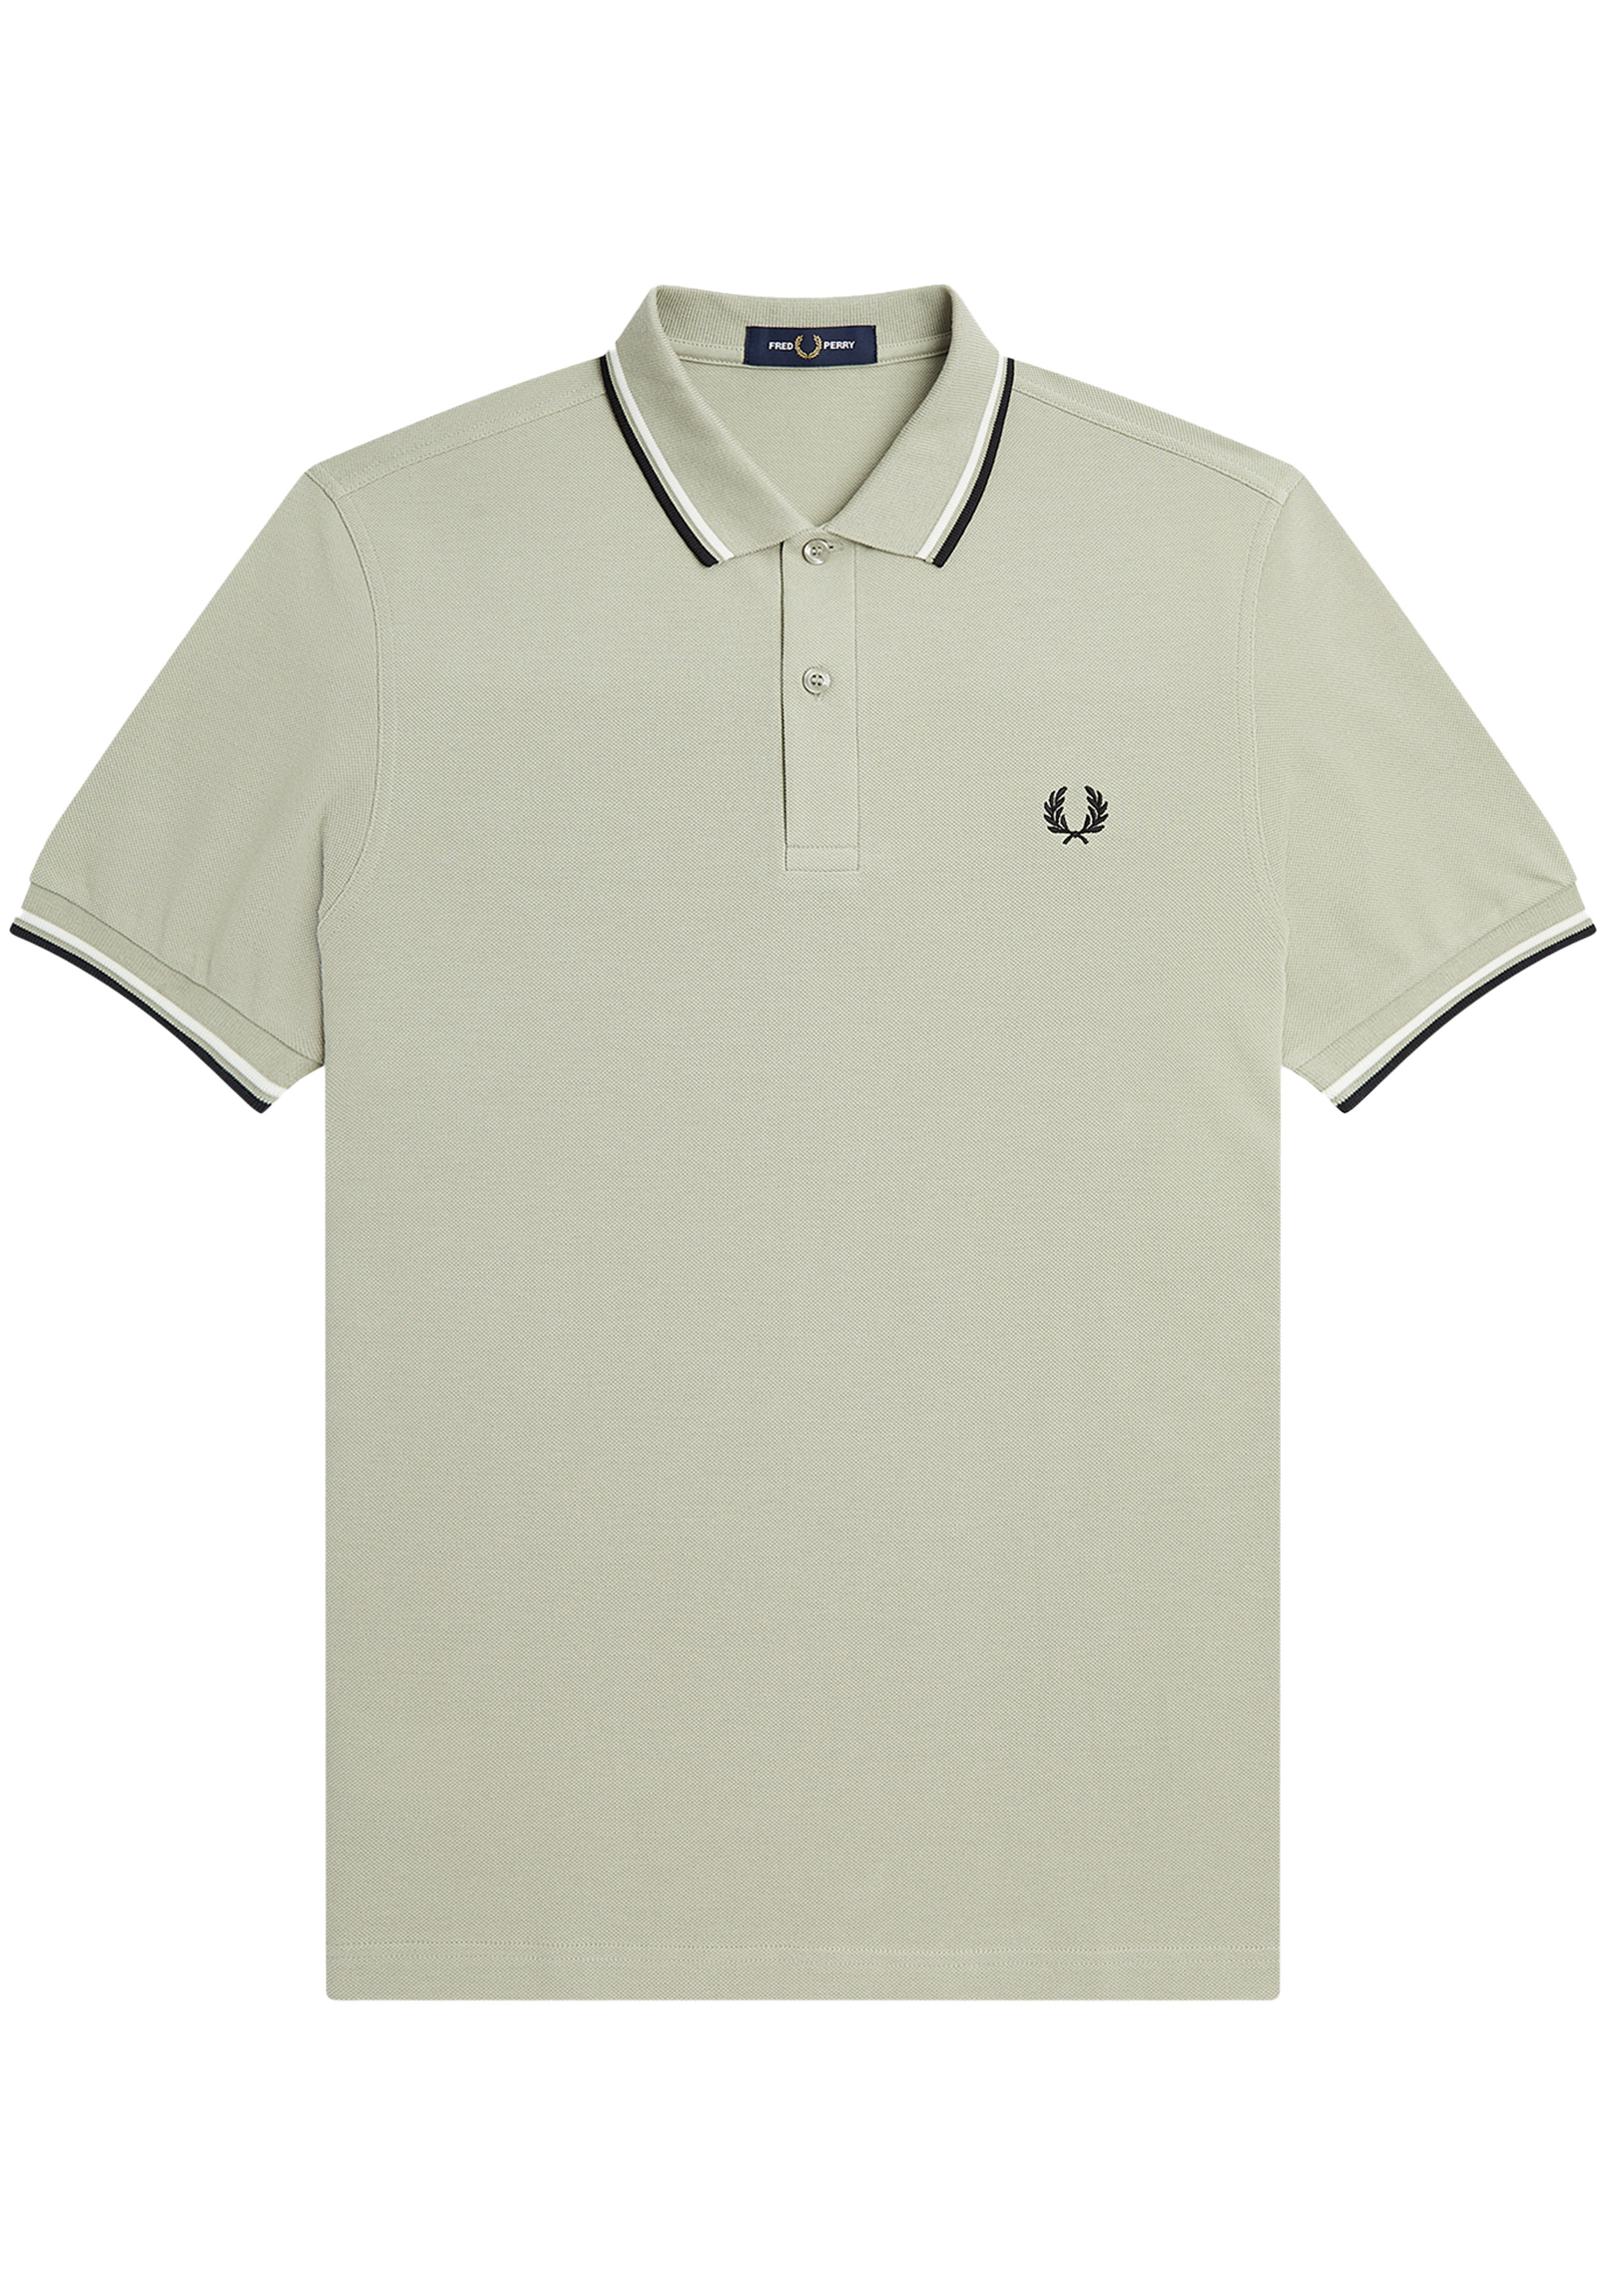 Fred Perry M3600 polo twin tipped shirt, pique, Seagrass / Snow White / Black